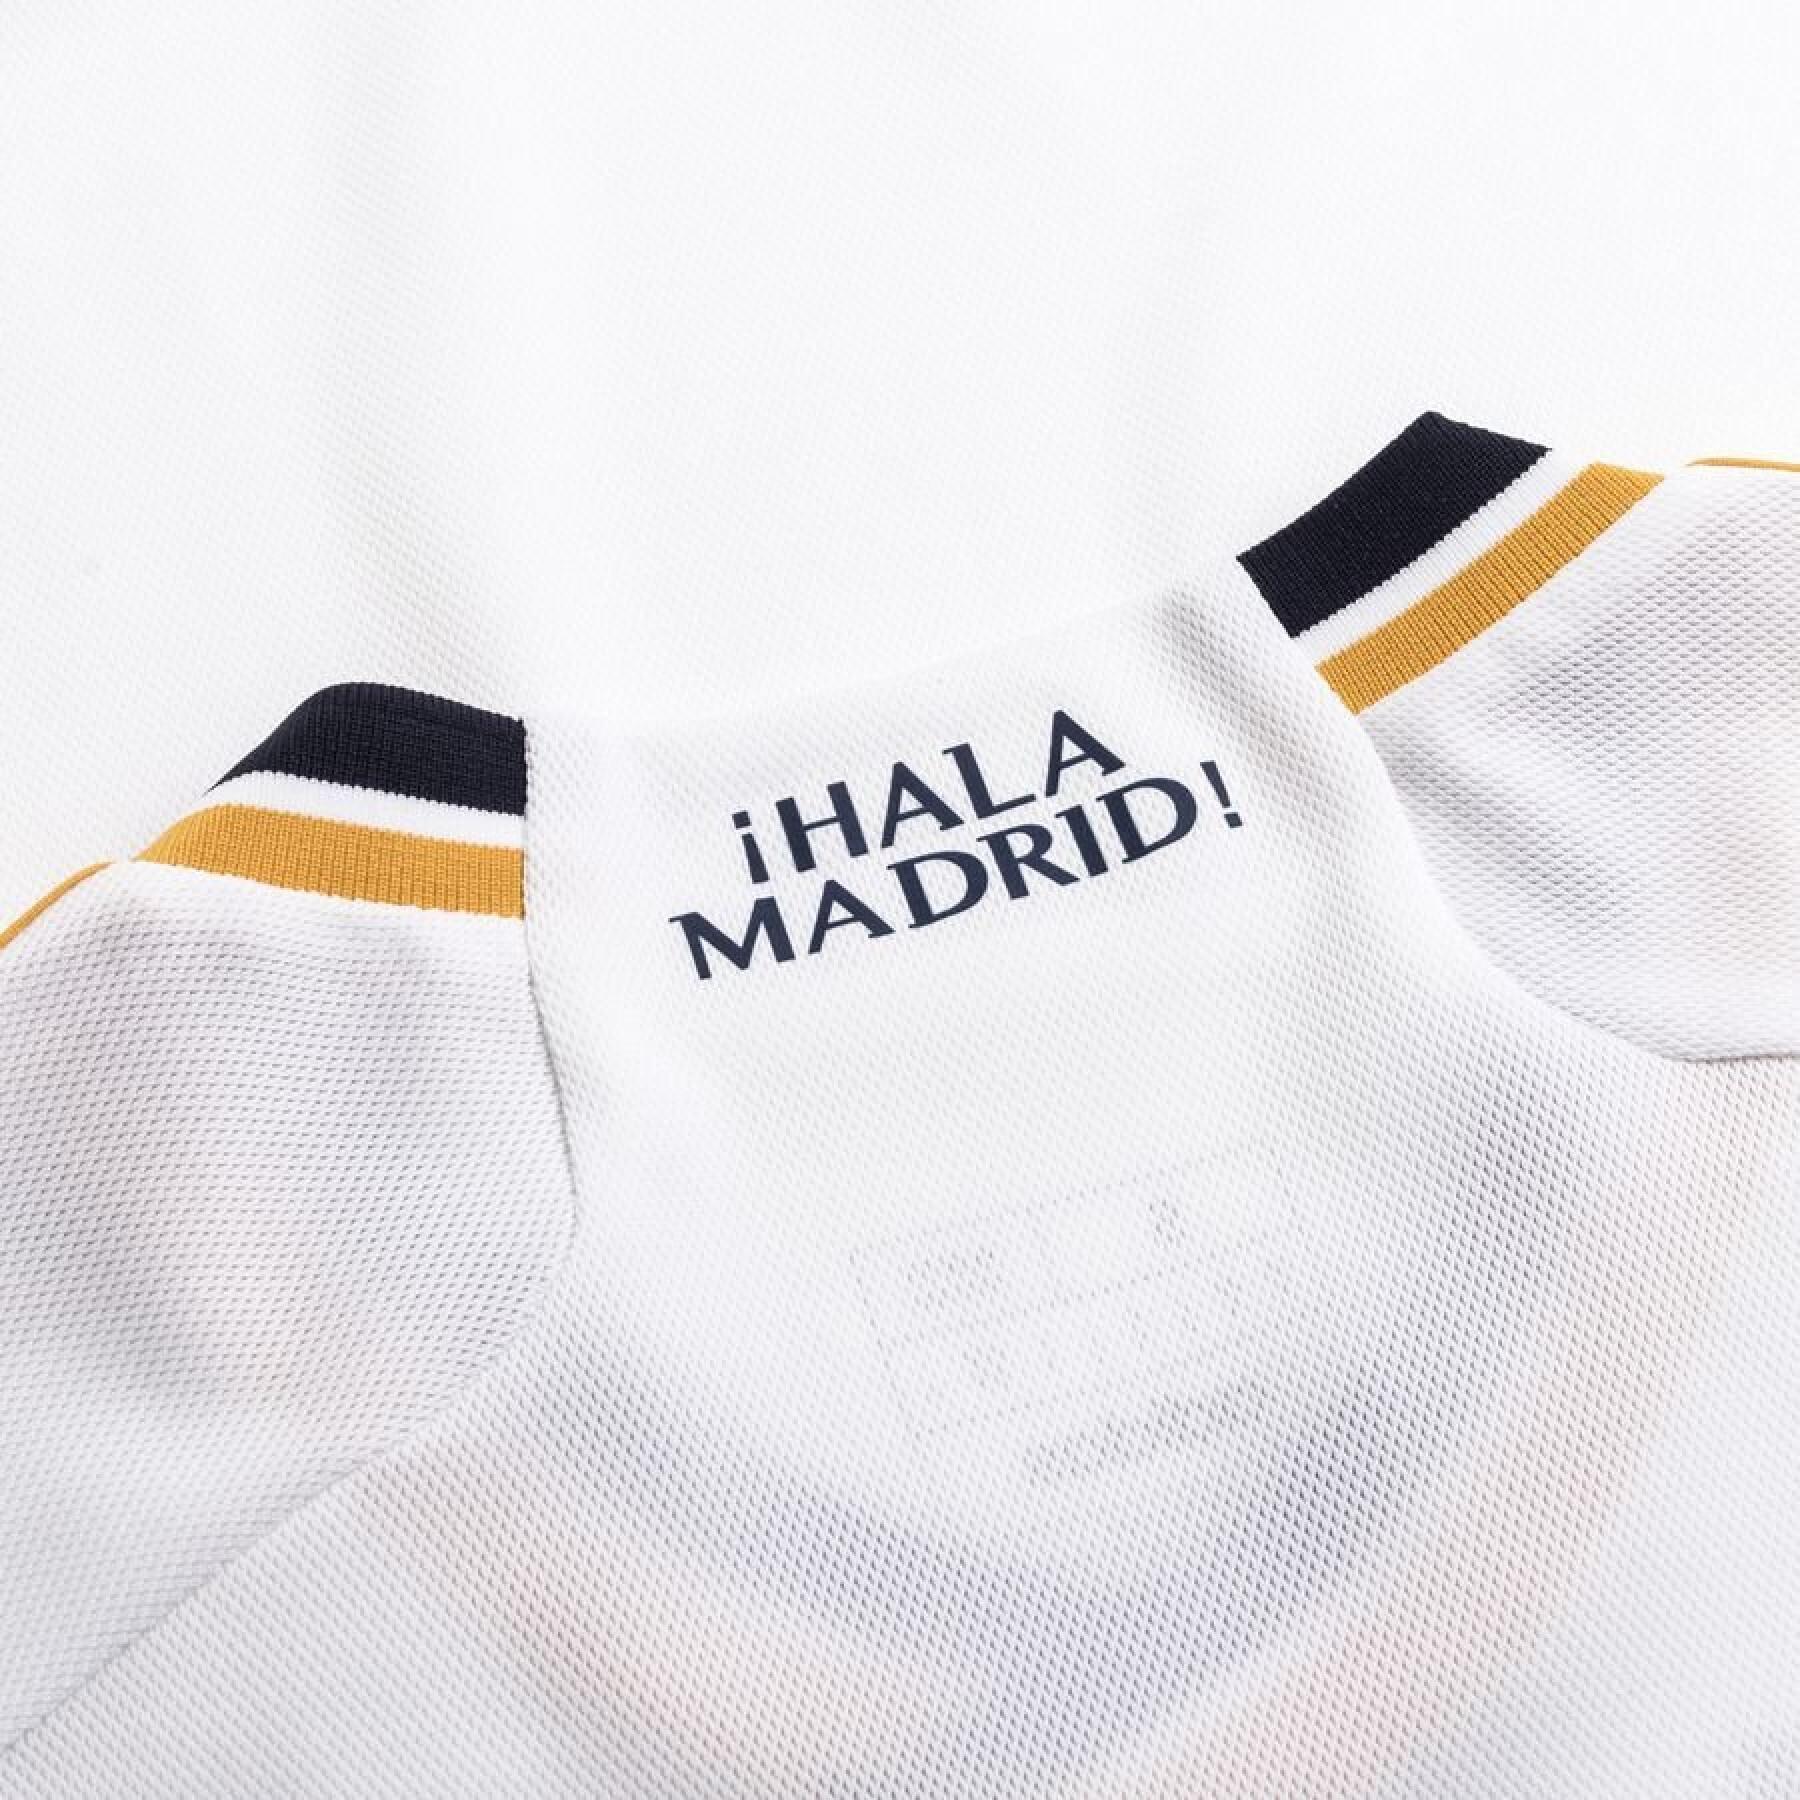 Home jersey child Real Madrid 2023/24